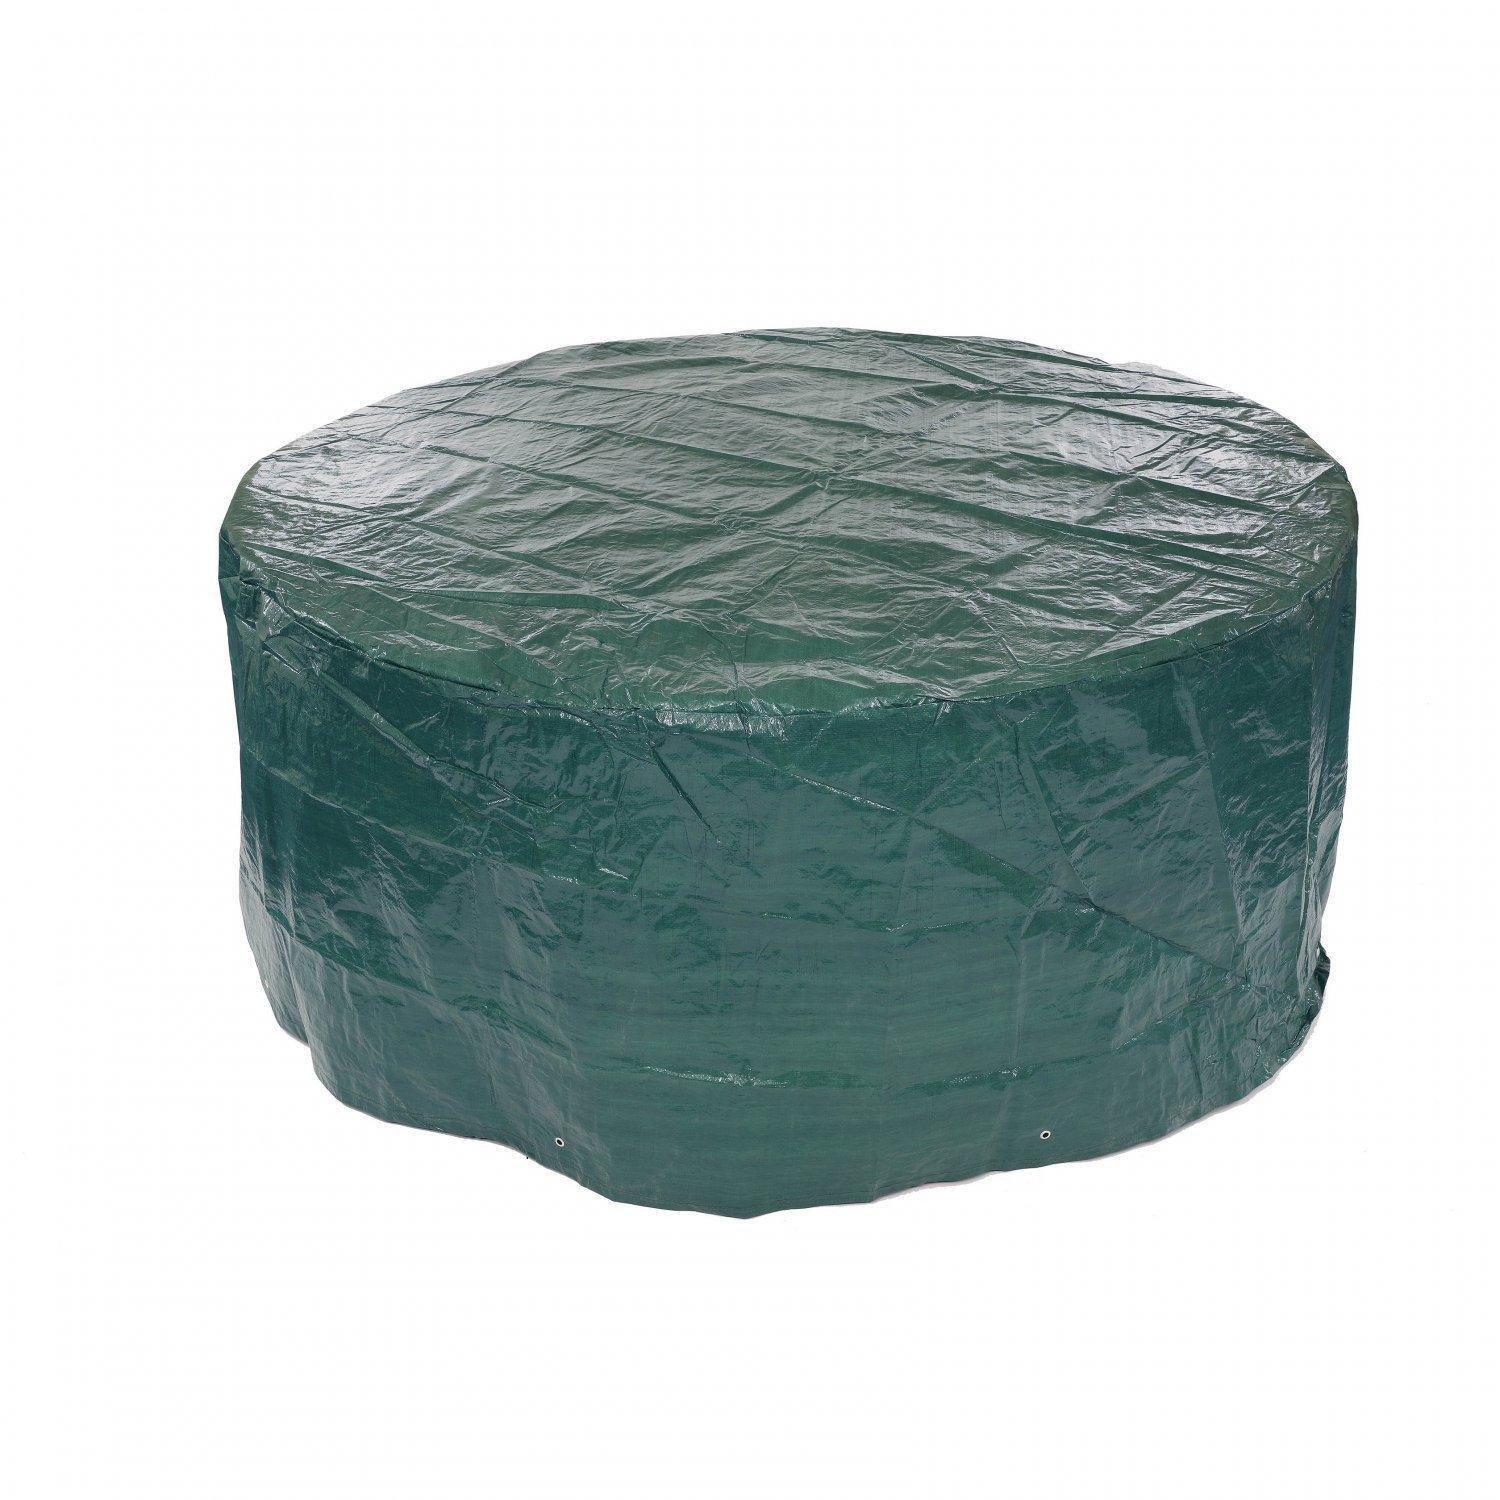 Waterproof Garden Patio Furniture Round Table And Chair Cover - image 1